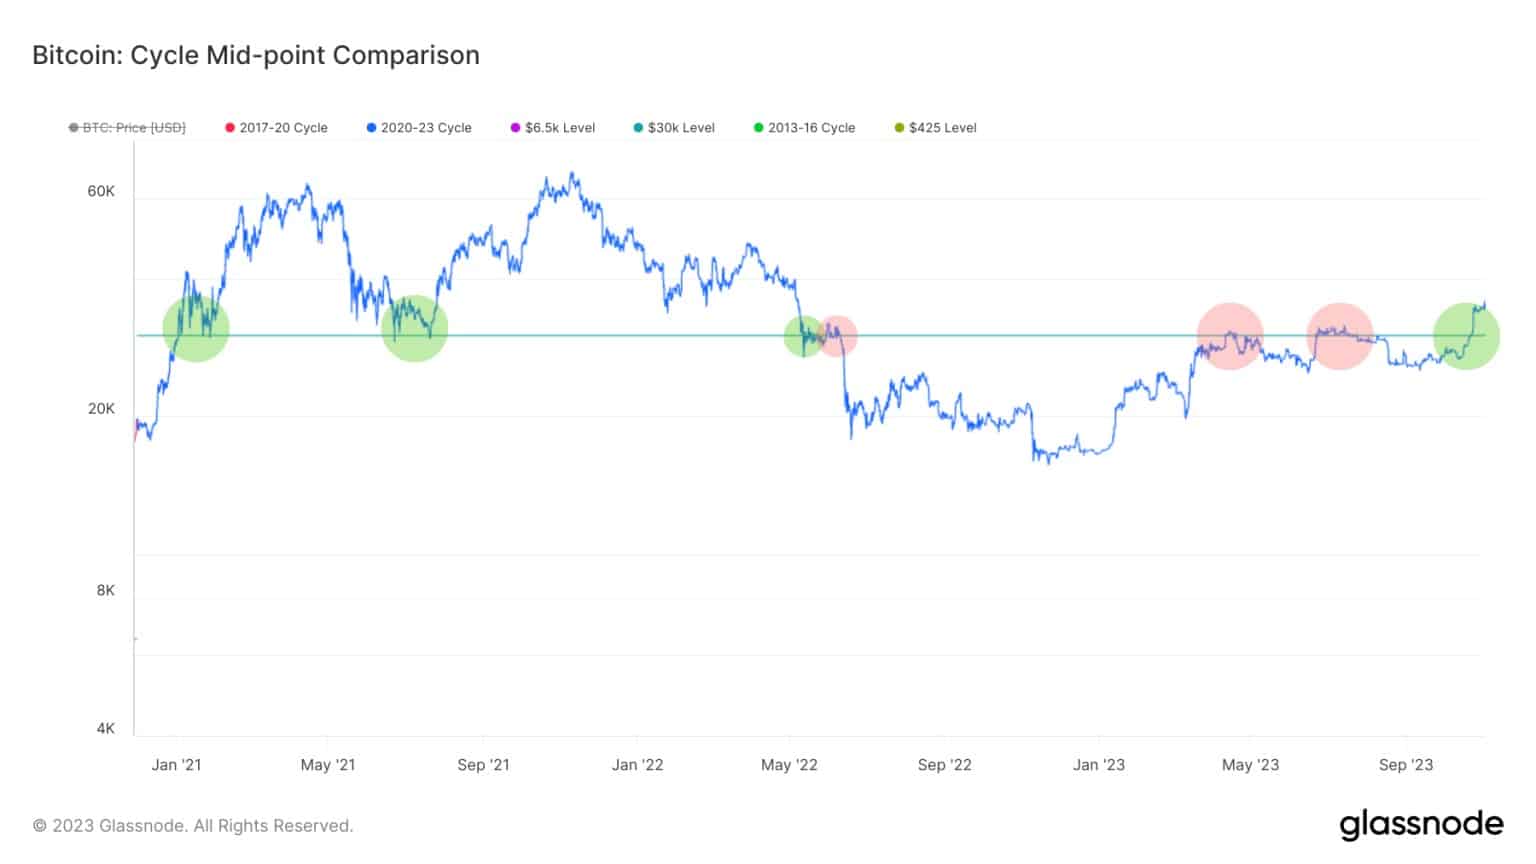 Figure 1: BTC price and bull/bear pivot for the 2020 - 2023 cycle